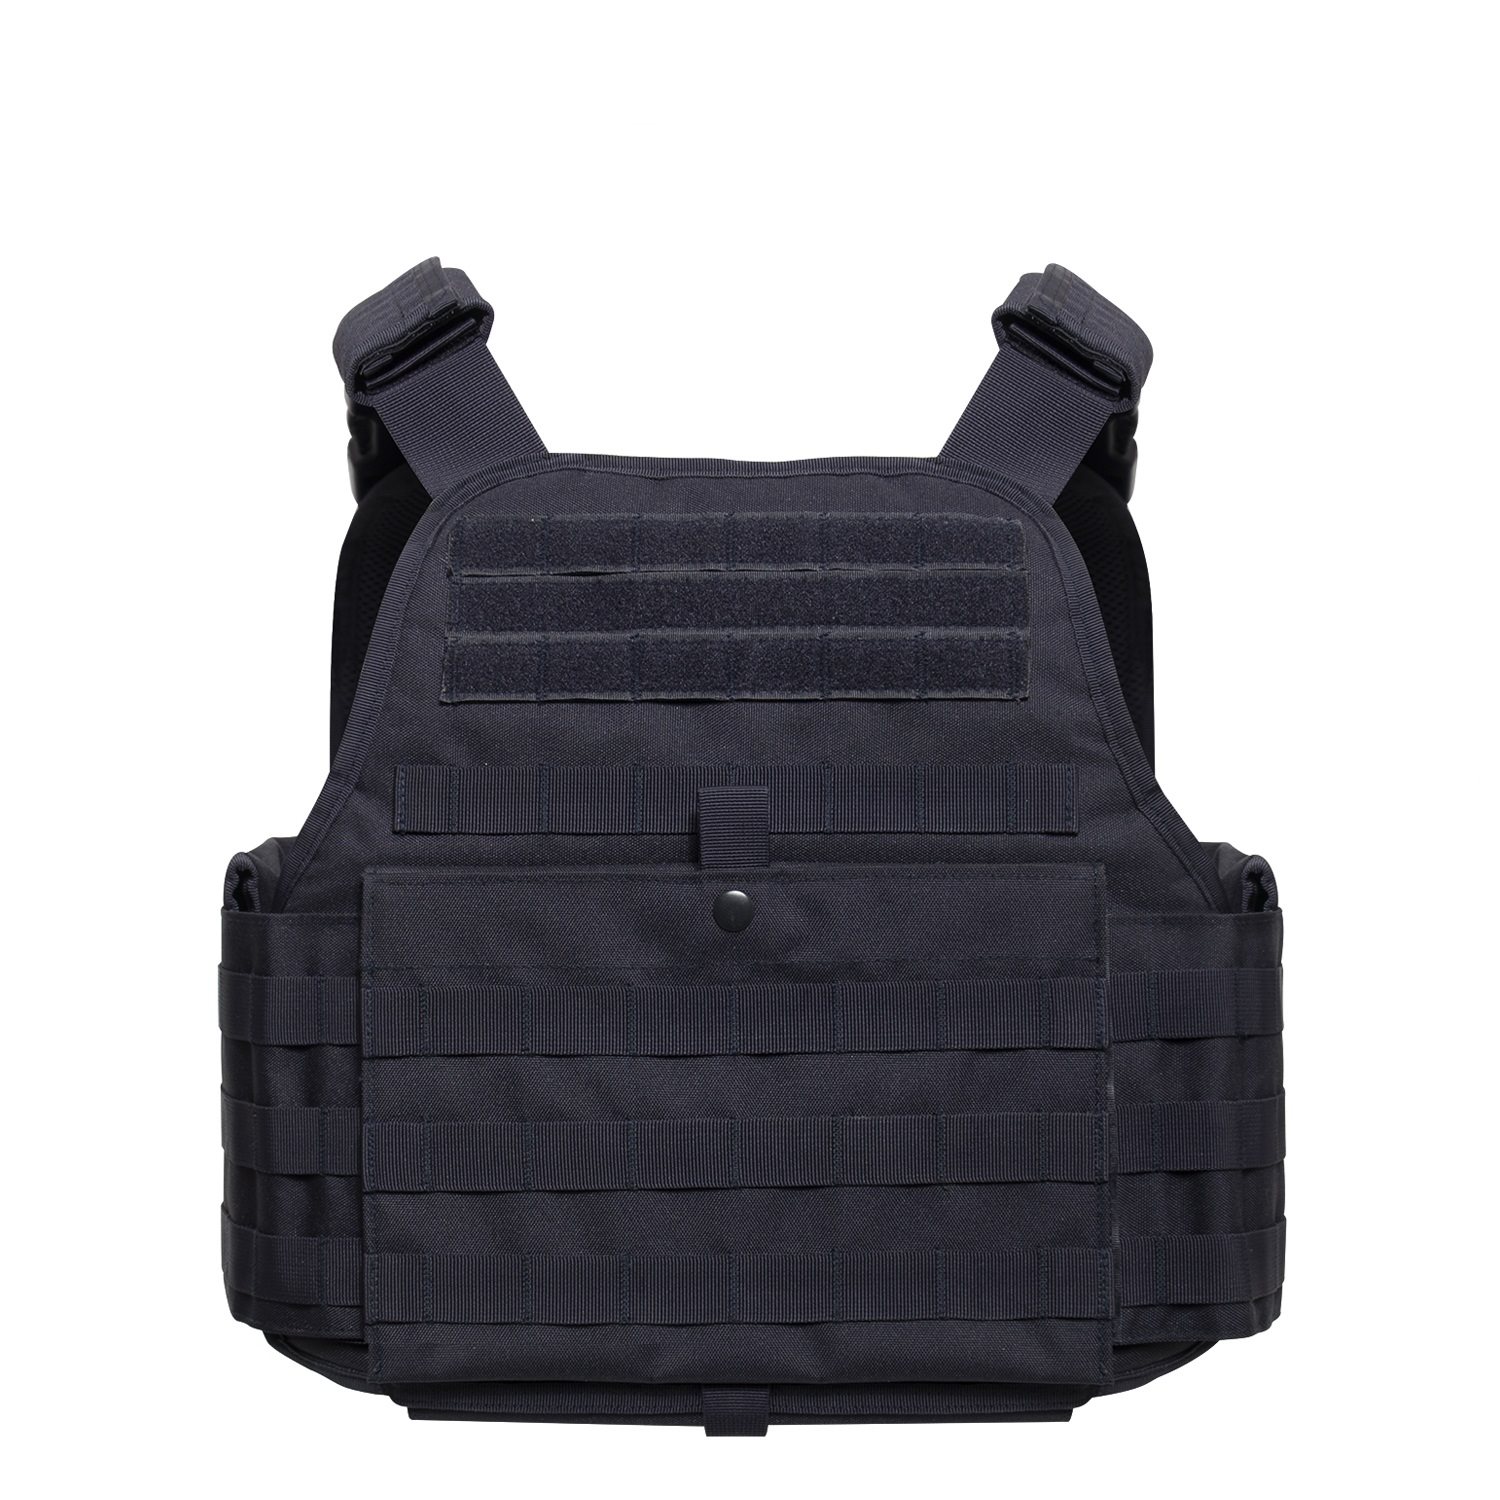 MILITARY PLATE CARRIER PLATE CARRIER VEST MOLLE ARMY PROTECTIVE VEST INSERT  VEST